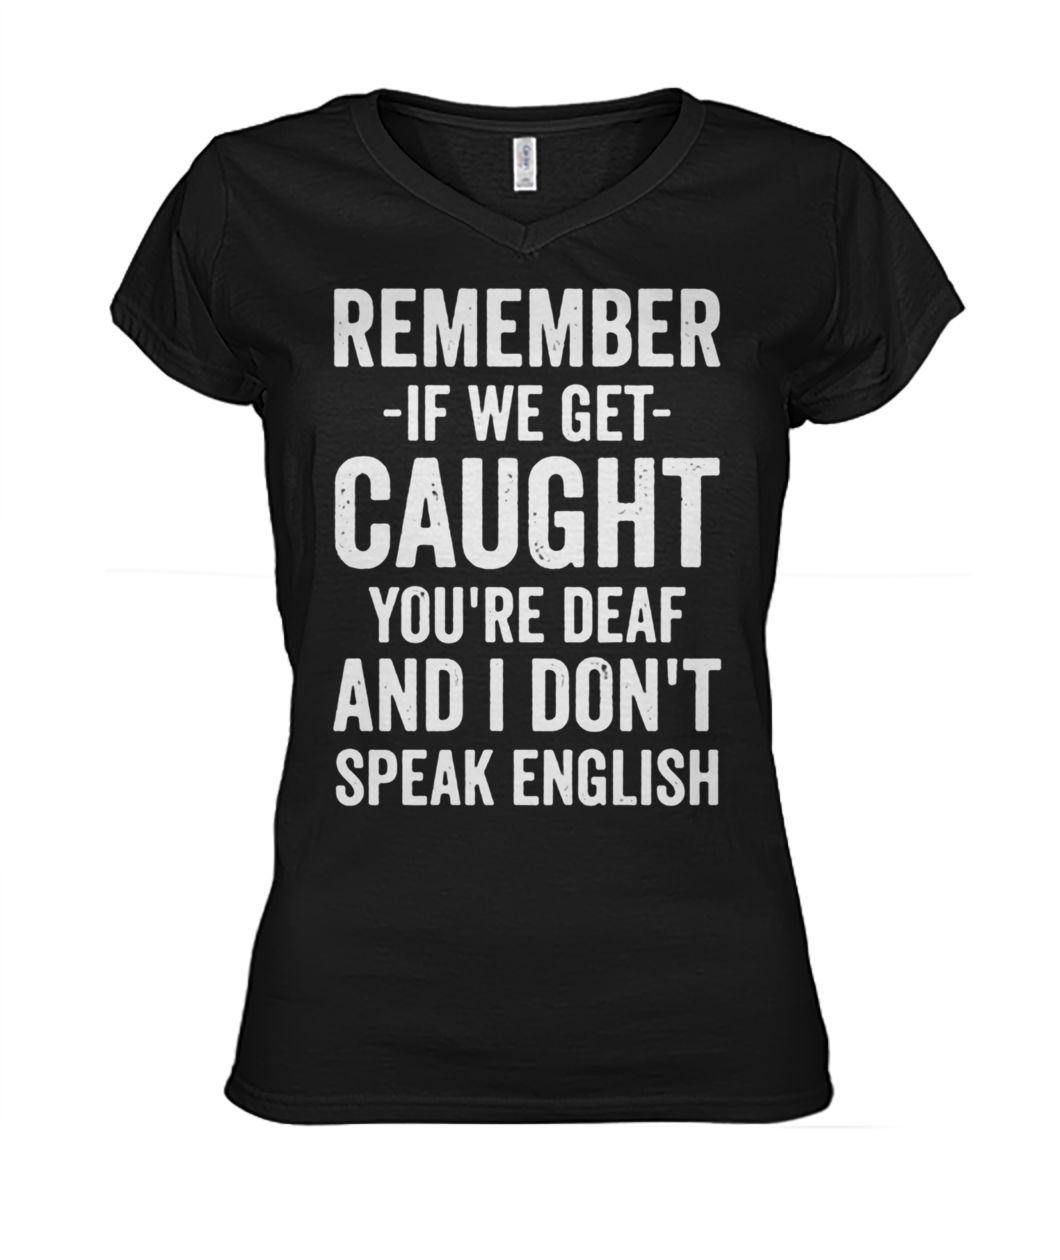 Remember if we get caught you're deaf and I don't speak english women's v-neck